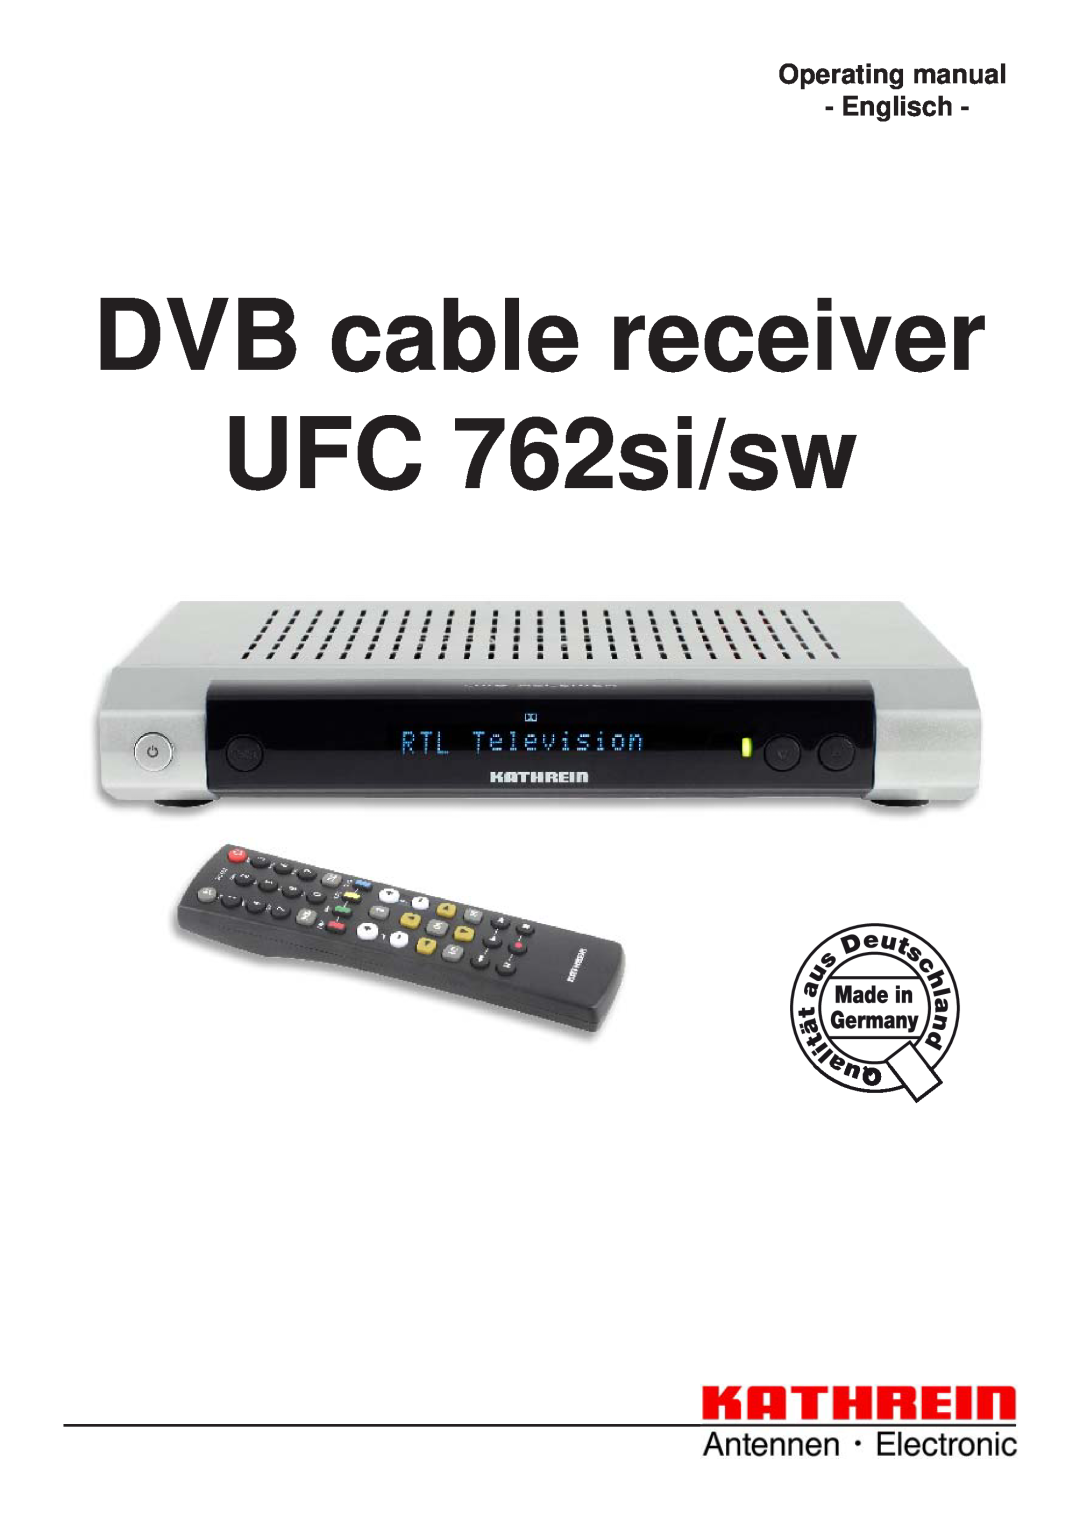 Kathrein UFC 762sw manual Operating manual - Englisch, DVB cable receiver UFC 762si/sw 